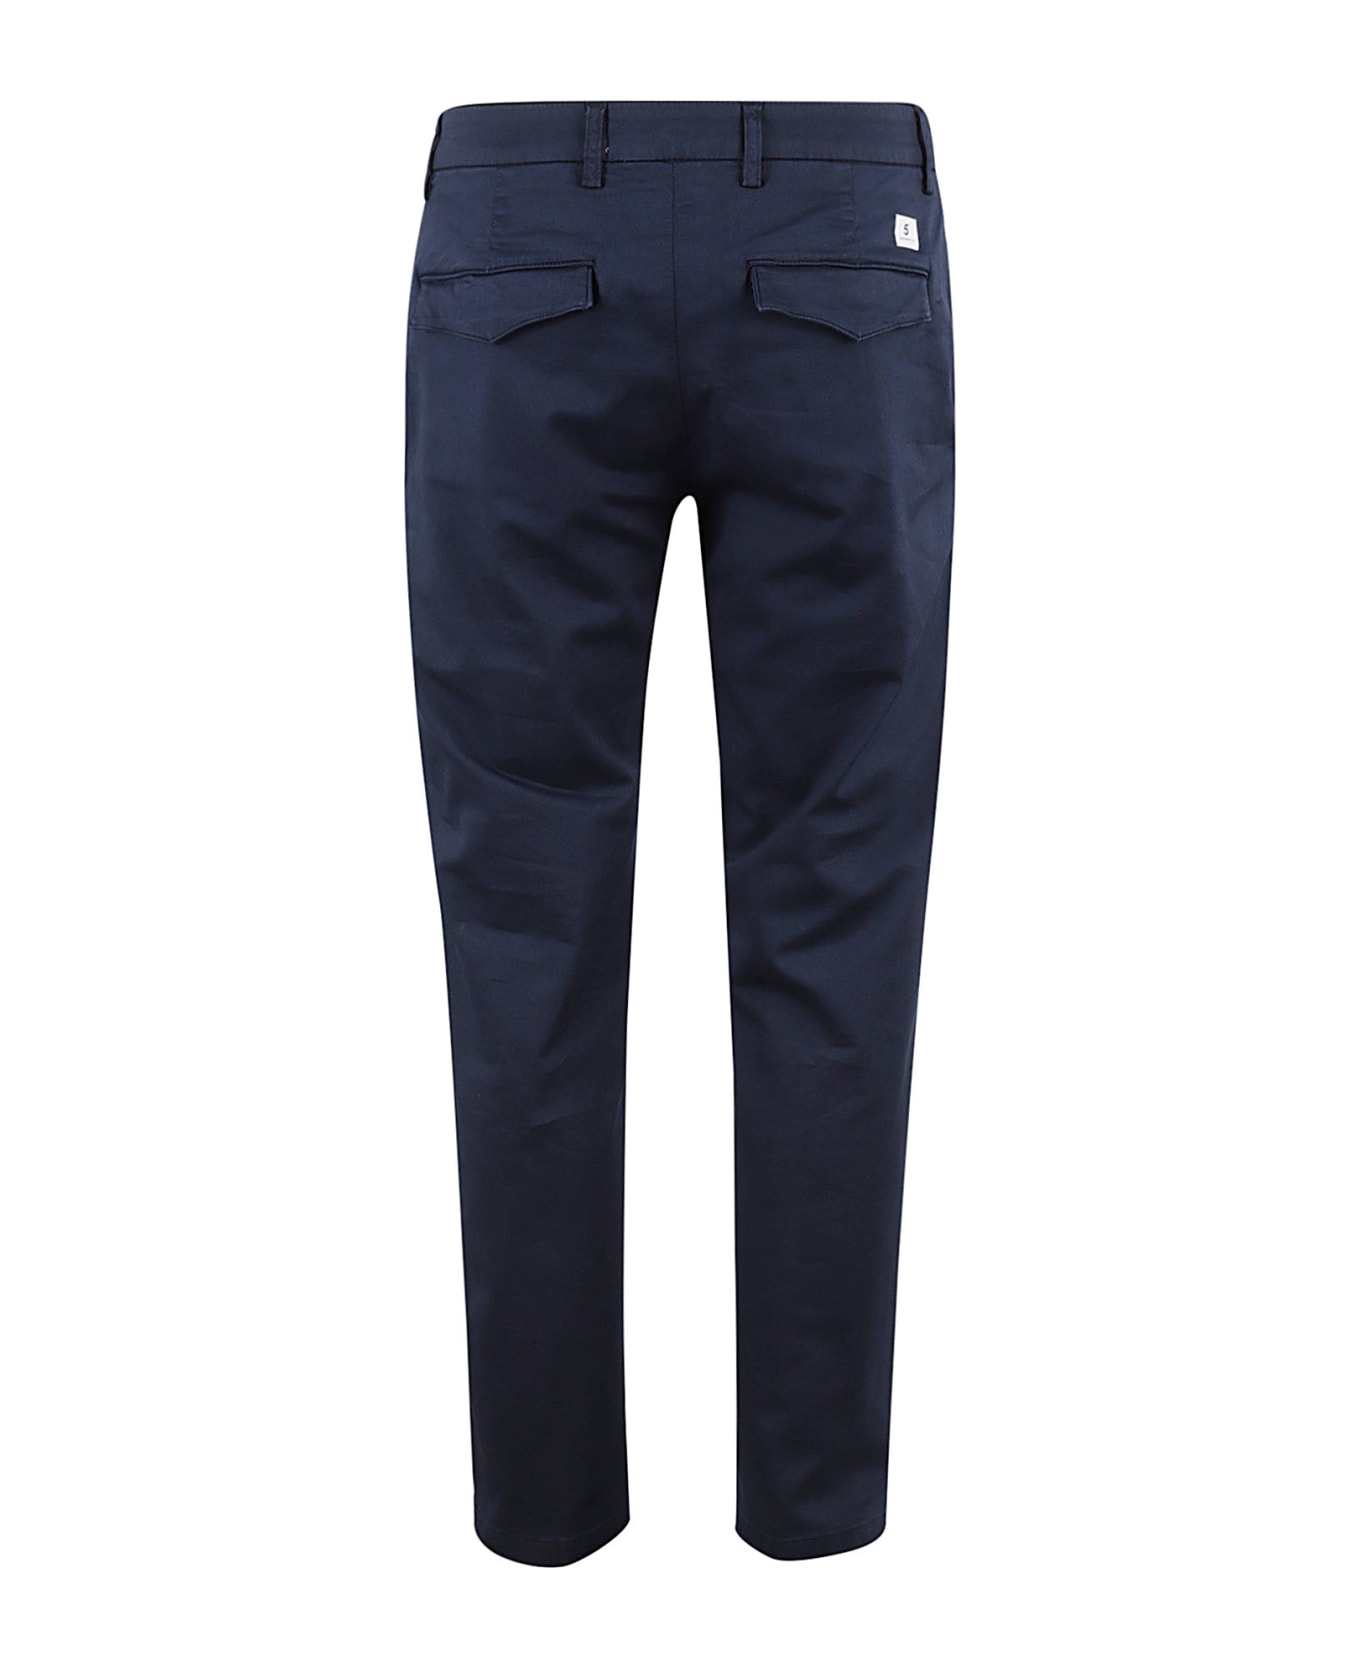 Department Five Prince - Navy